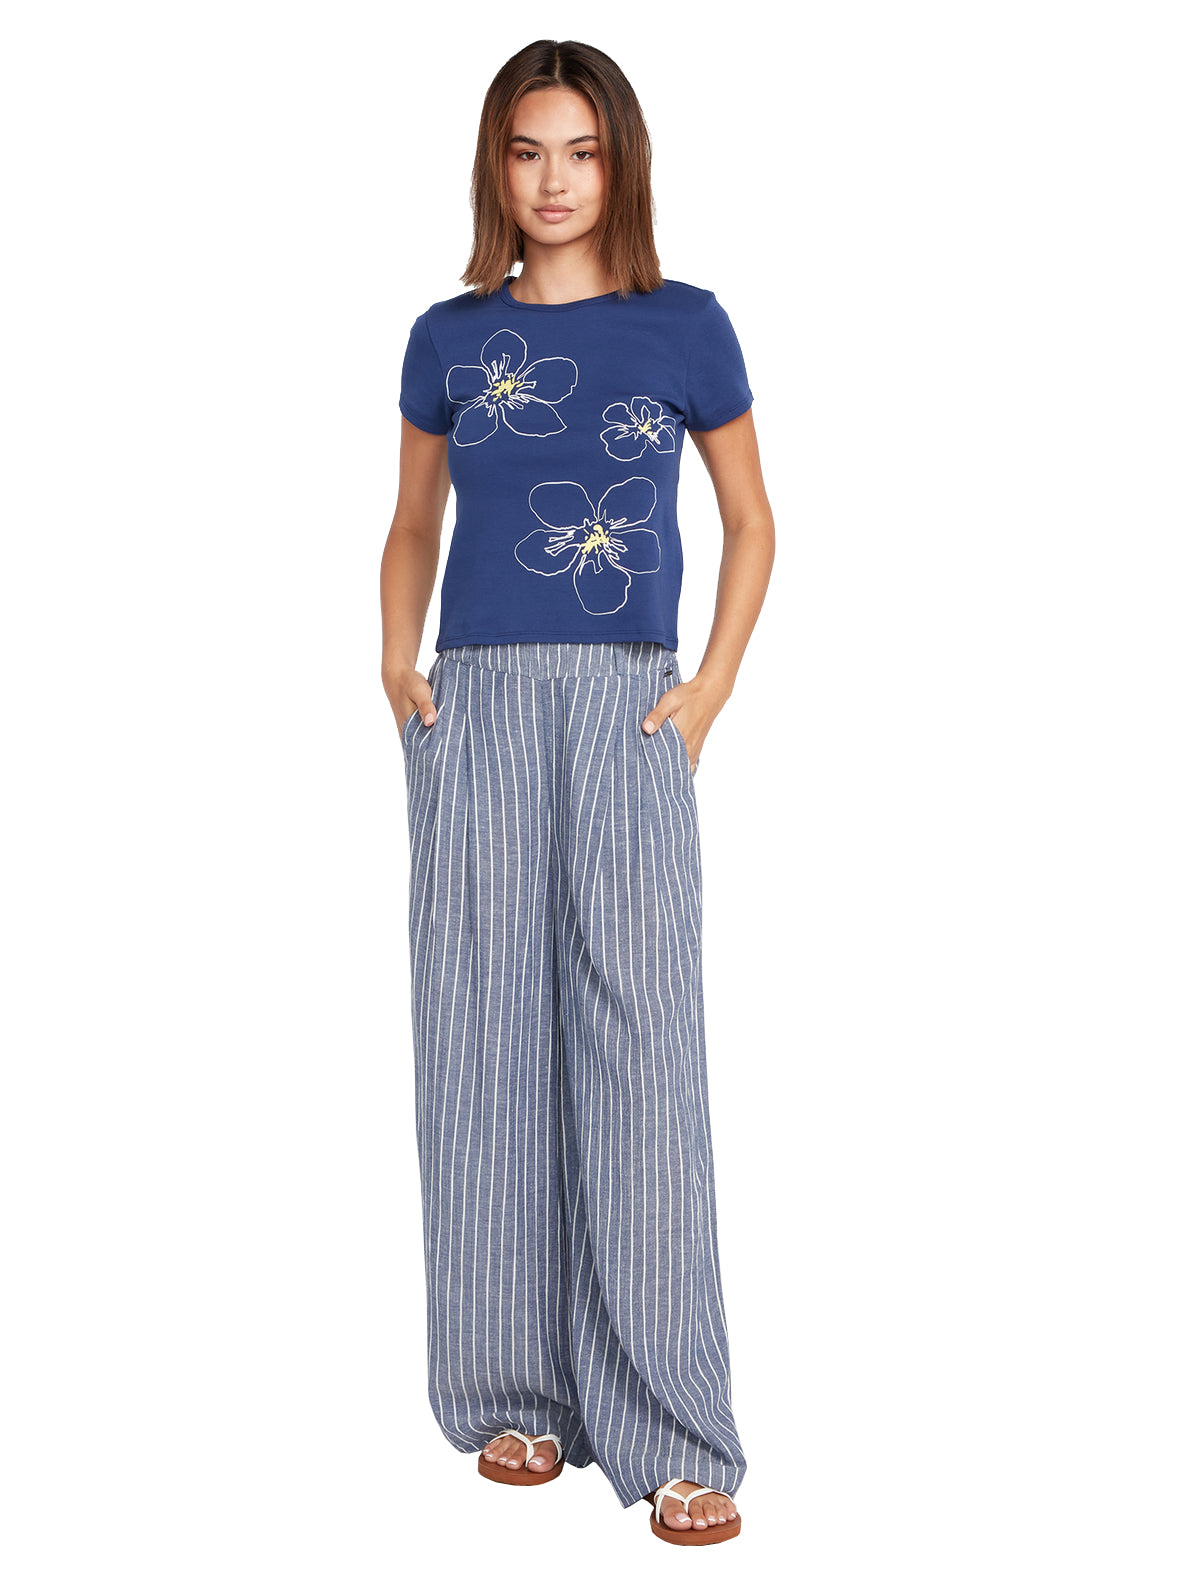 Volcom Coco Ho Trouser Pant NVY L